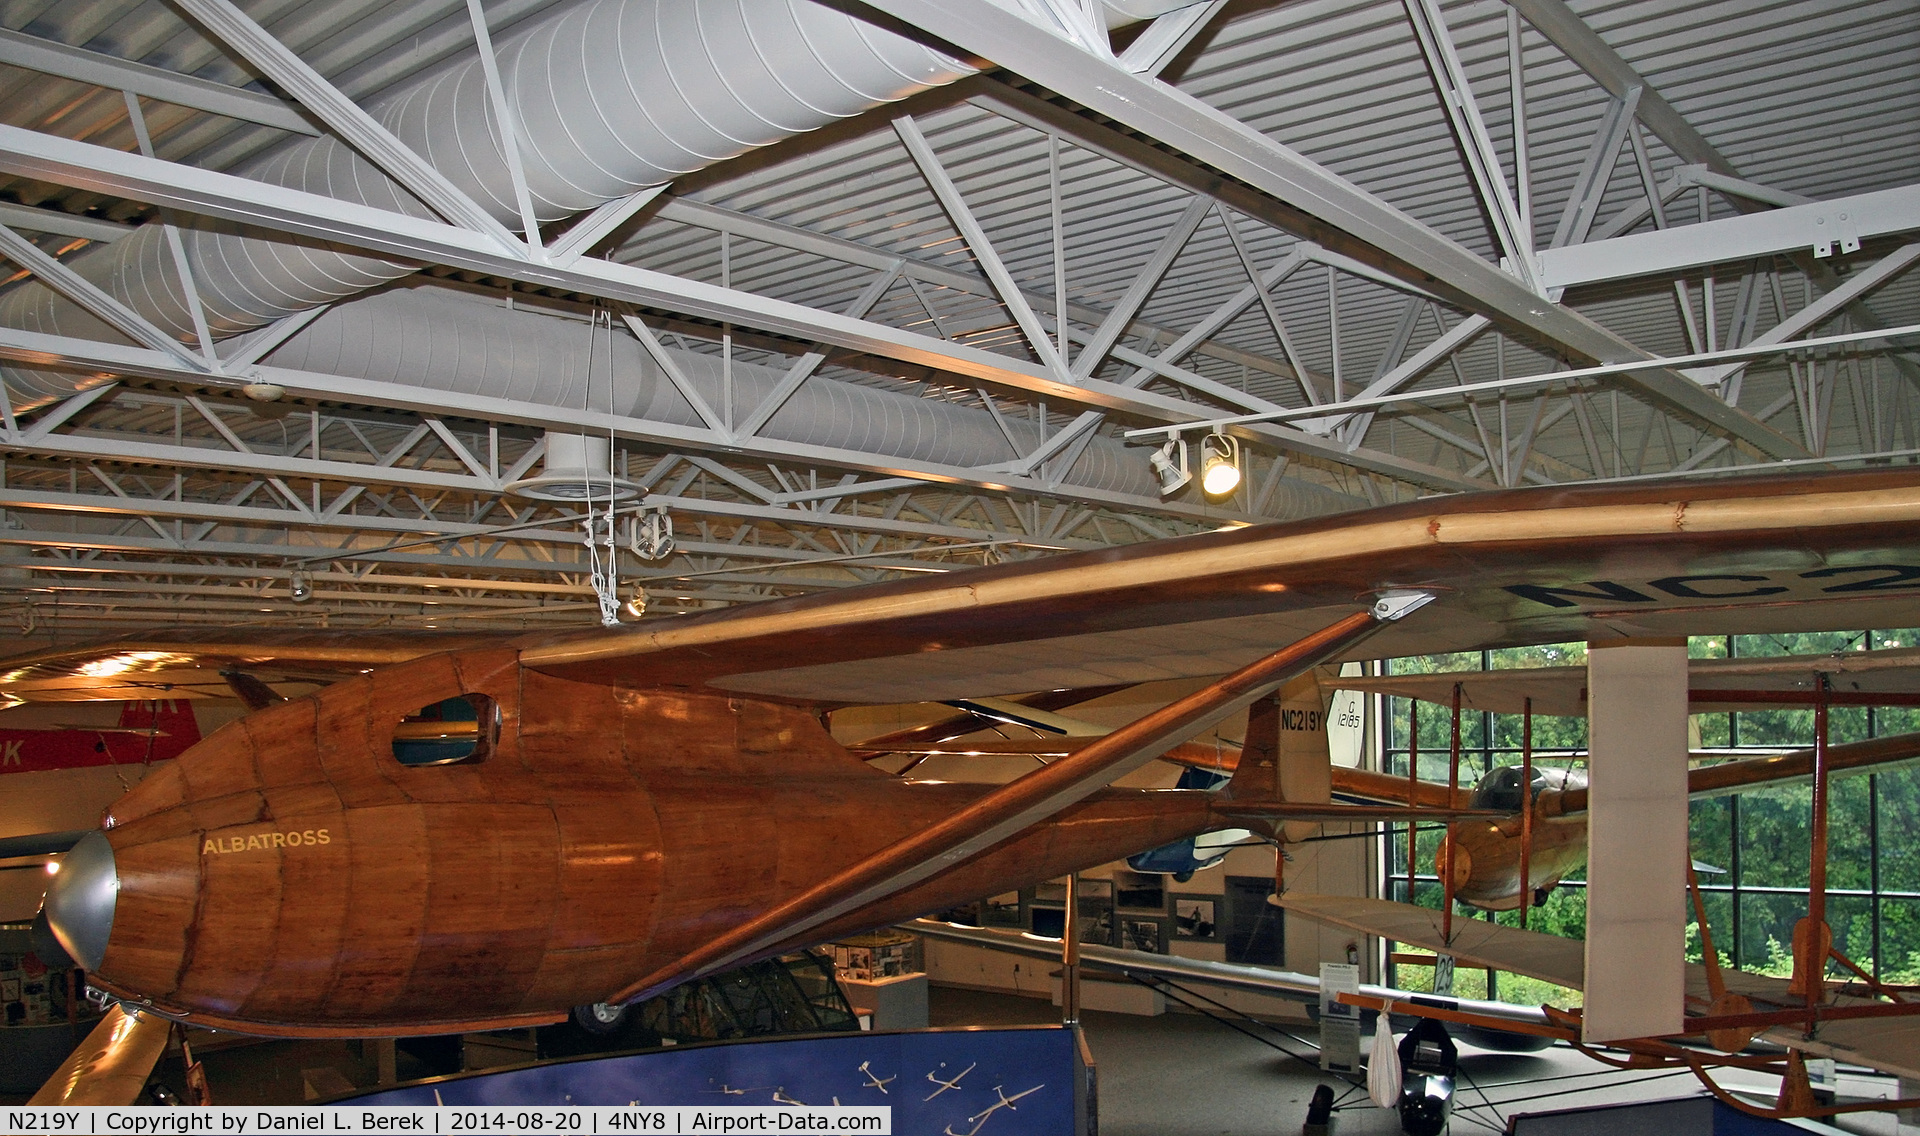 N219Y, 1933 Bowlus-dupont 1-S-2100 C/N 1, This beautiful sailplane has been lovingly preserved and is proudly displayed at the National Soaring Museum, Elmira, NY.